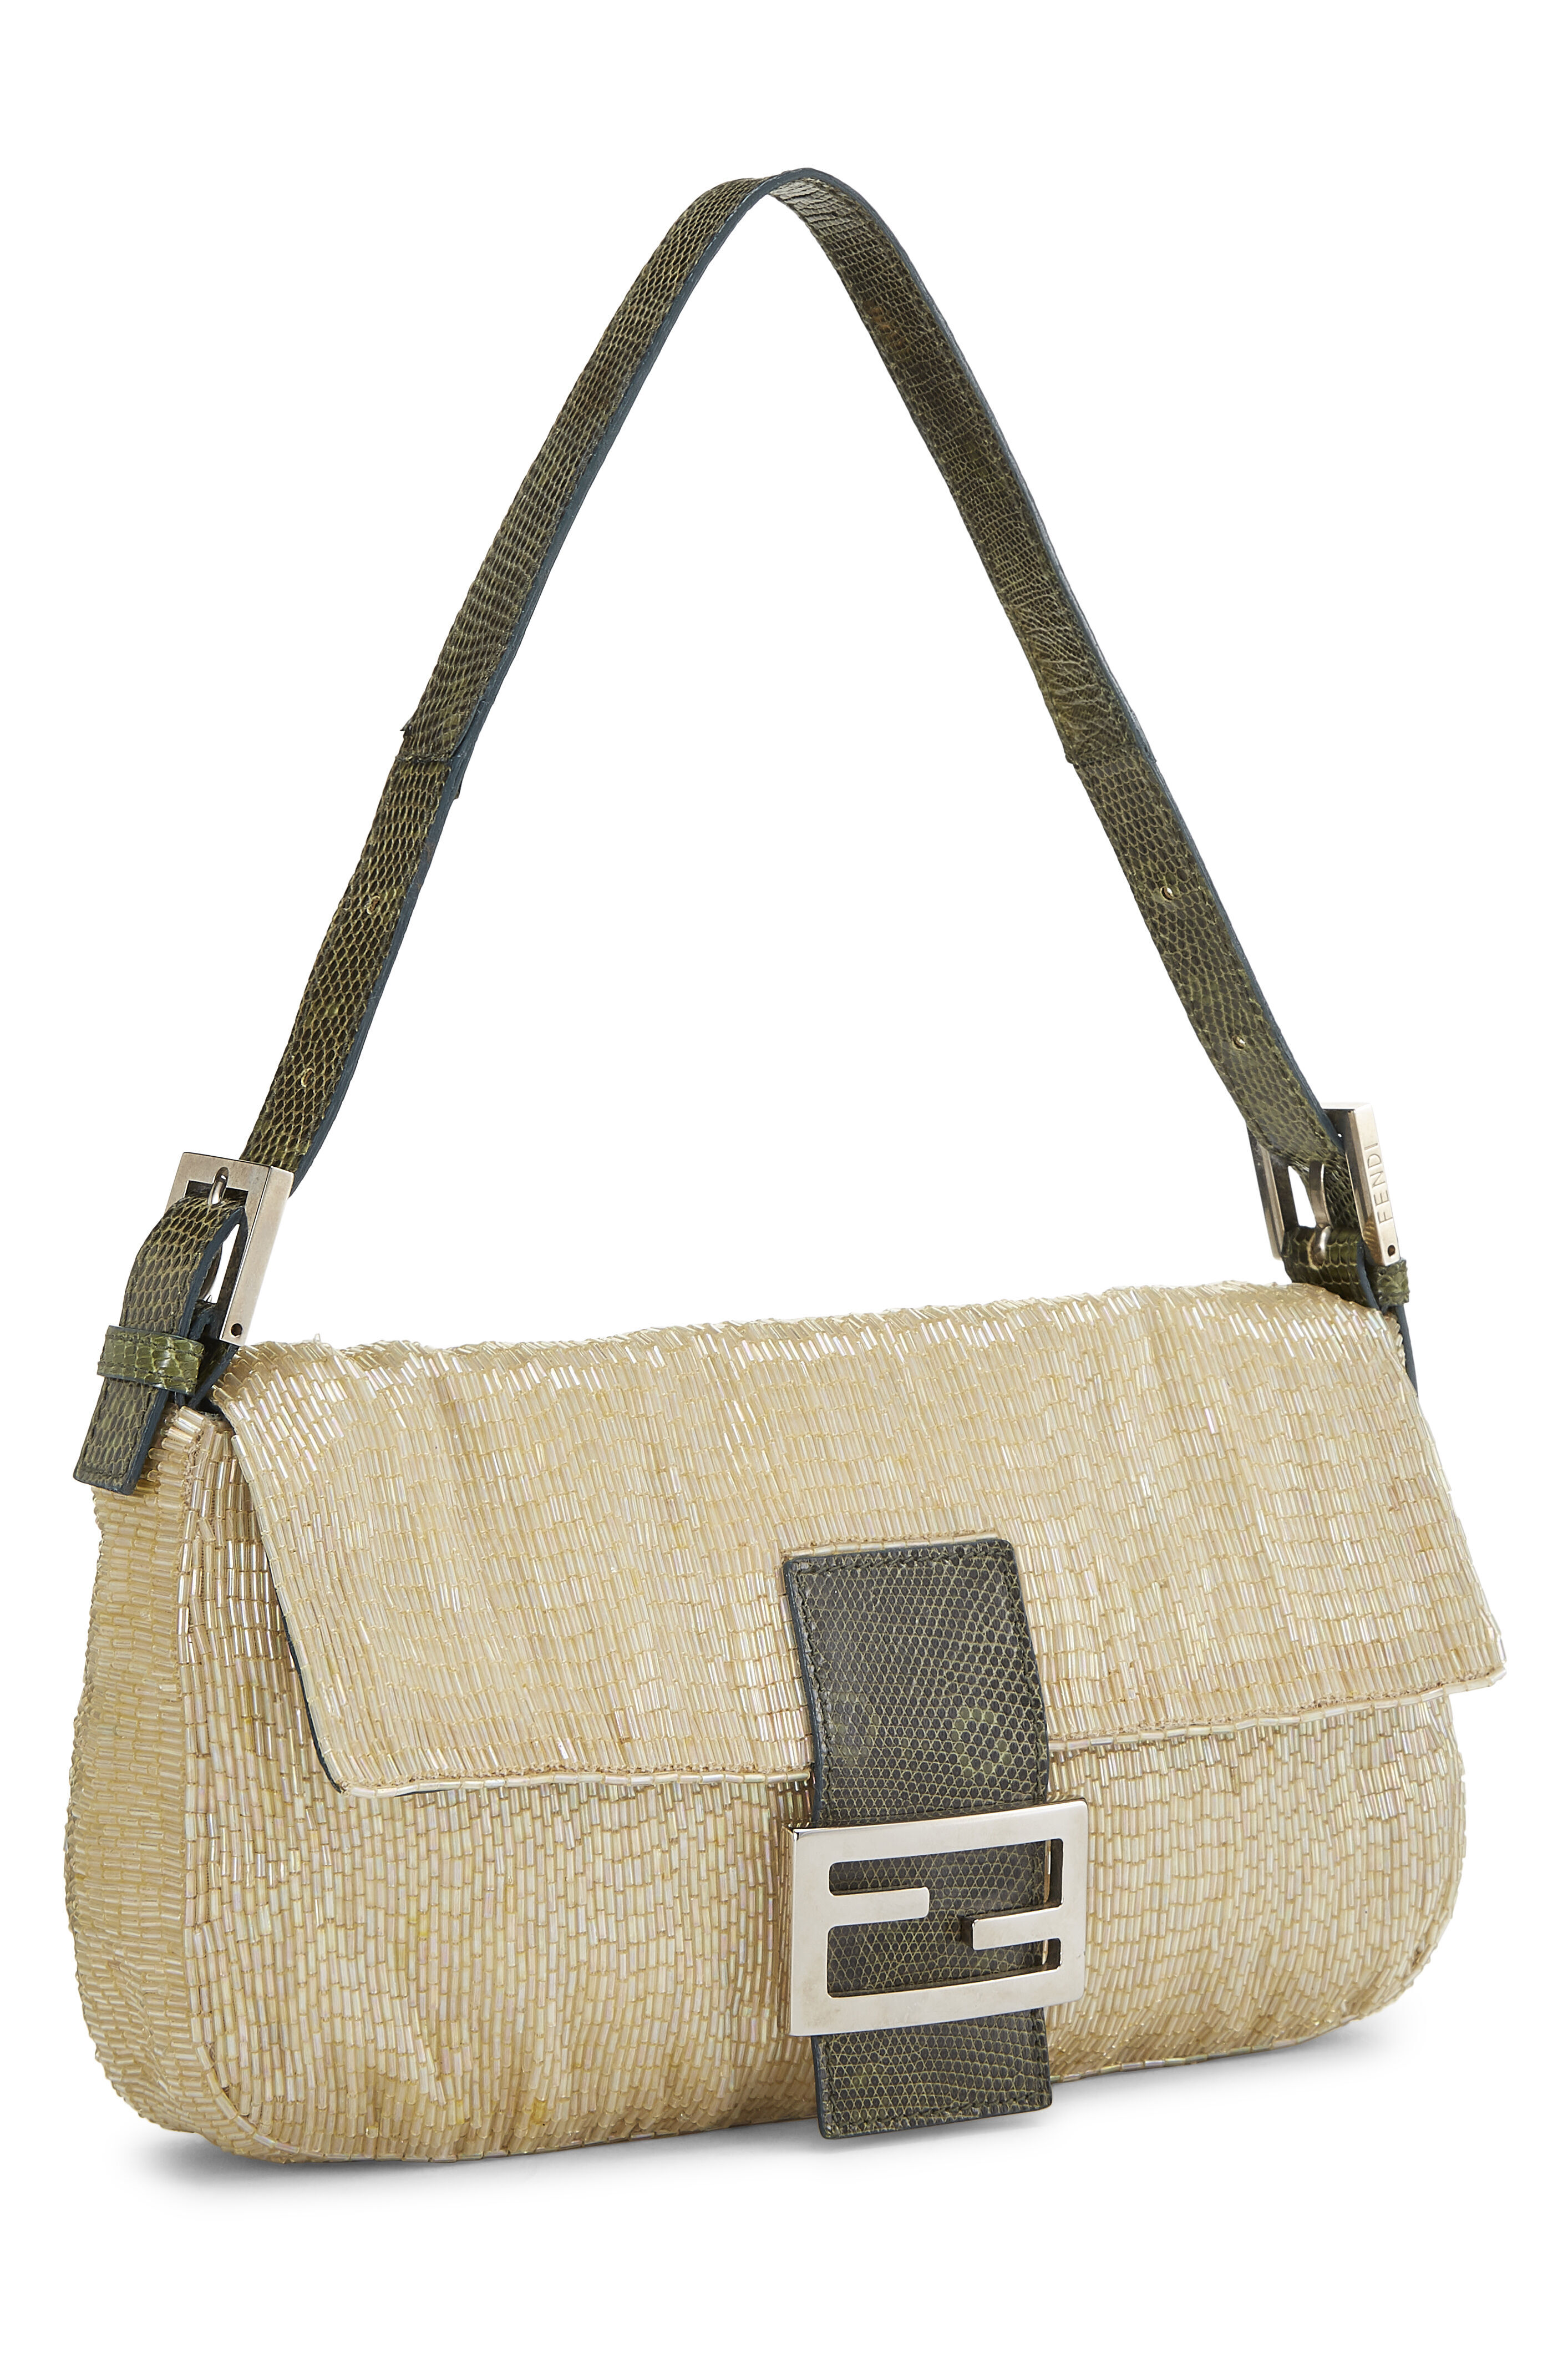 Vintage and Pre-Owned Fendi Handbags and Clothing 